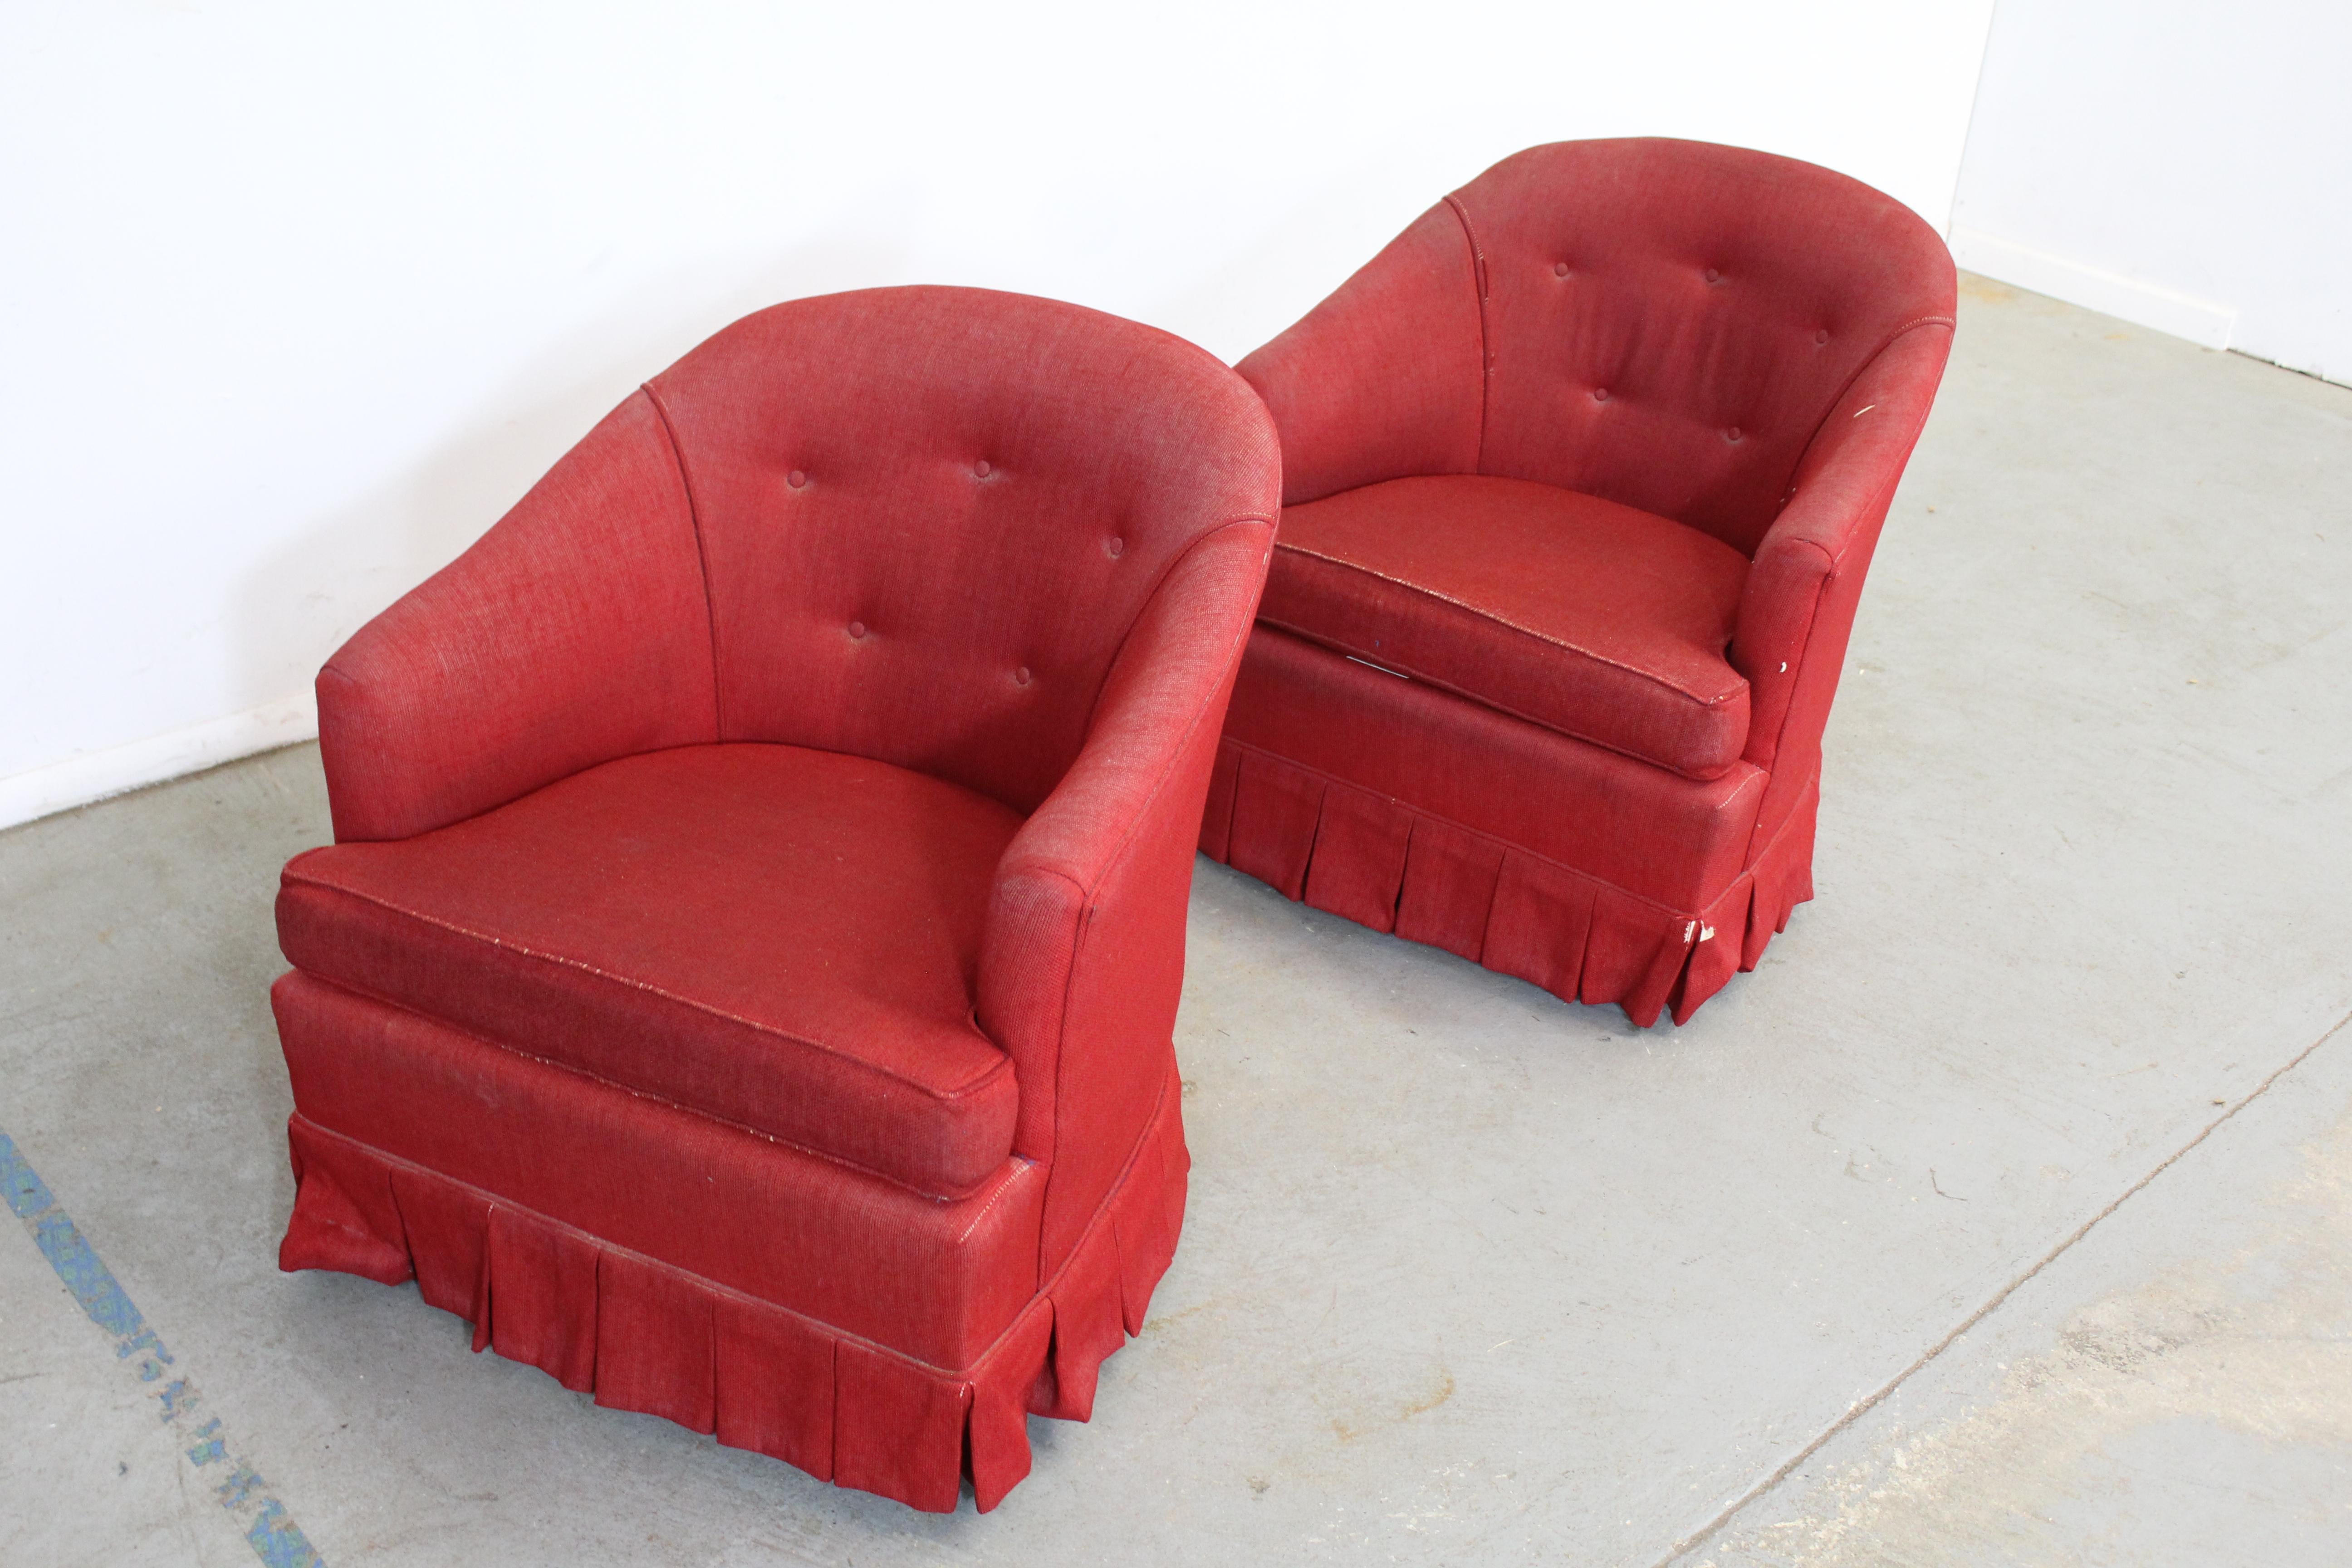 Pair of Mid-Century Modern Barrel back Ethan Allen Swivel club chairs

Offered is a Pair of Mid-Century Modern Barrel Back Ethan Allen Swivel club chairs. They are signed. These two chairs could stand to be reupholstered and need new cushion due